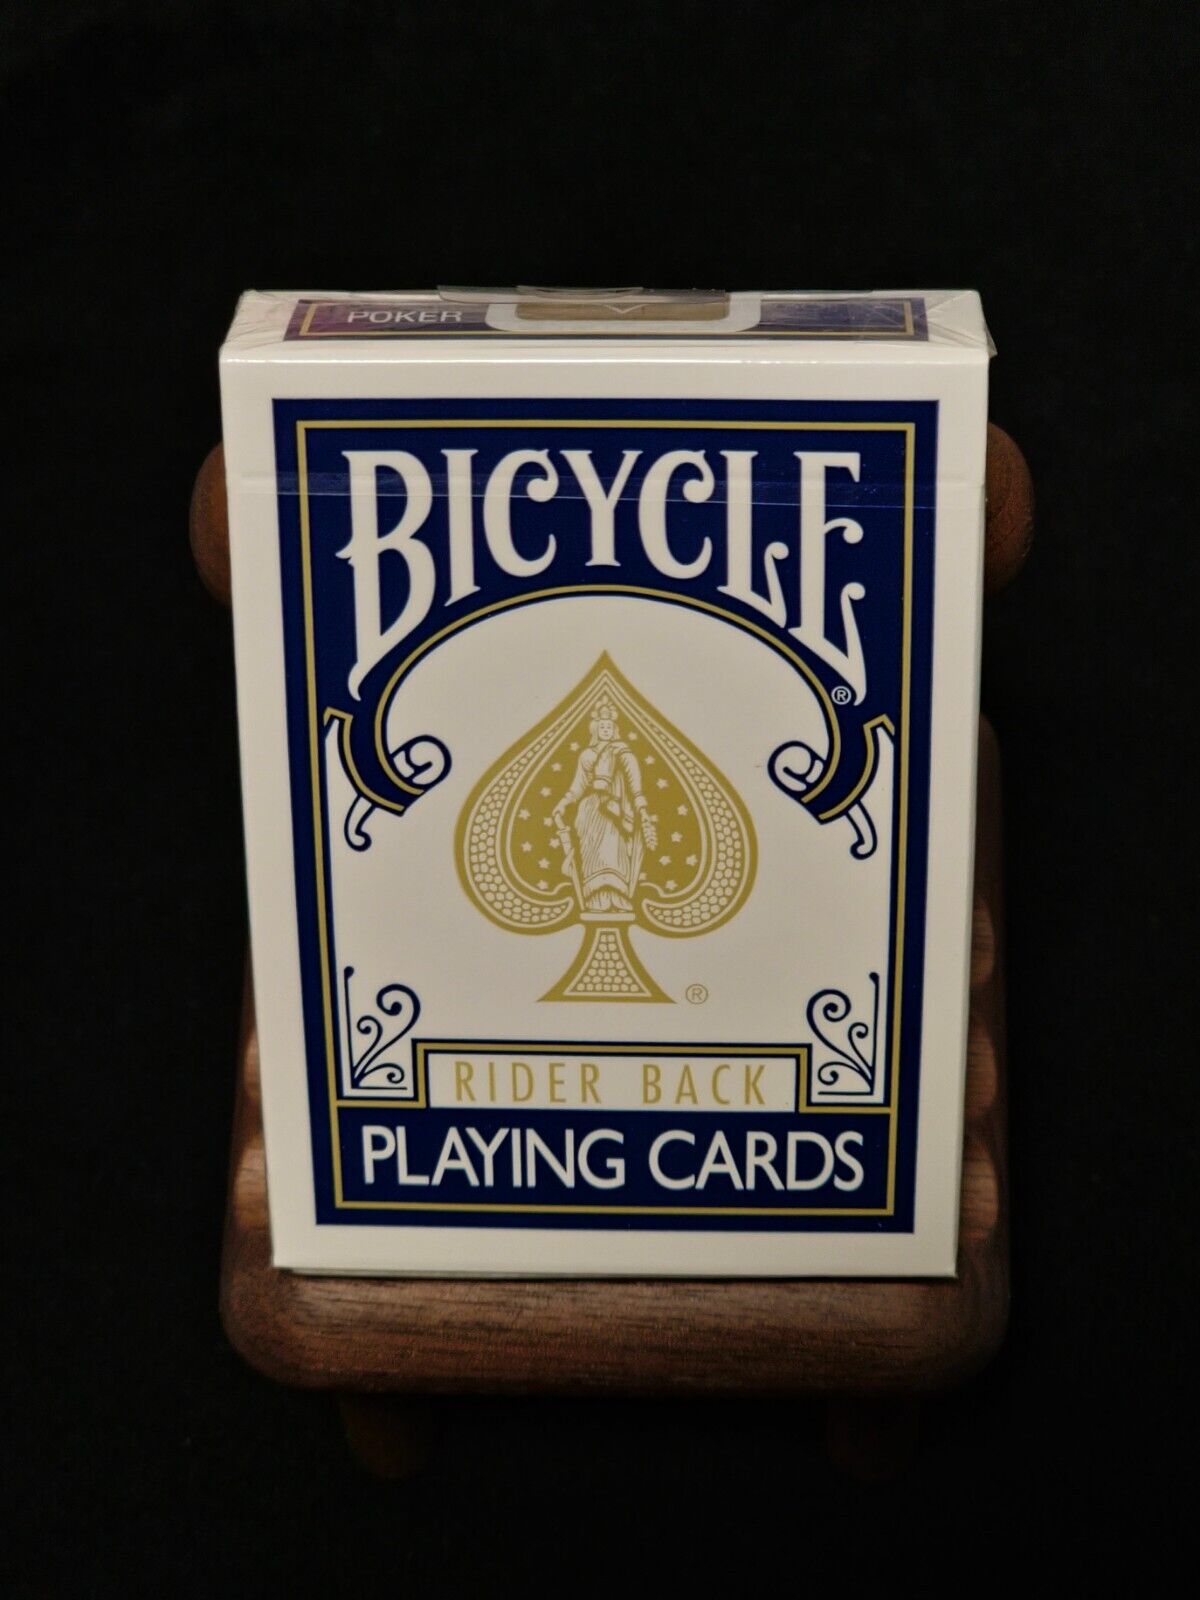 Bicycle Rider Back Playing Cards EPCS edition